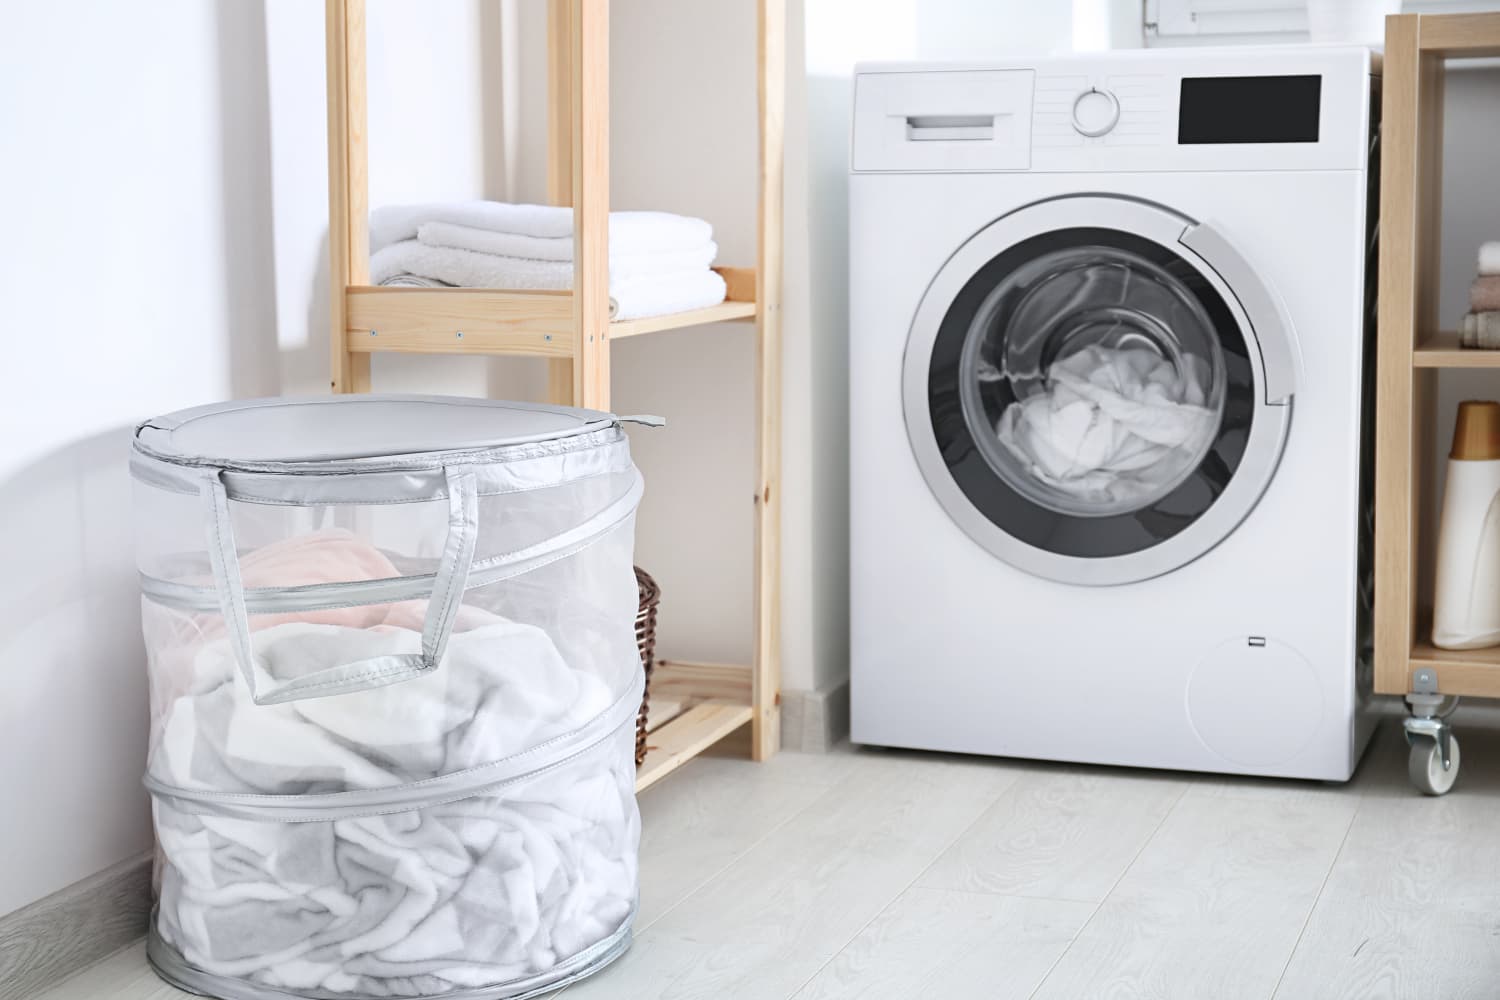 The $9 Gadget That’ll Improve Dryer Performance and Keep Clothes Lint-Free